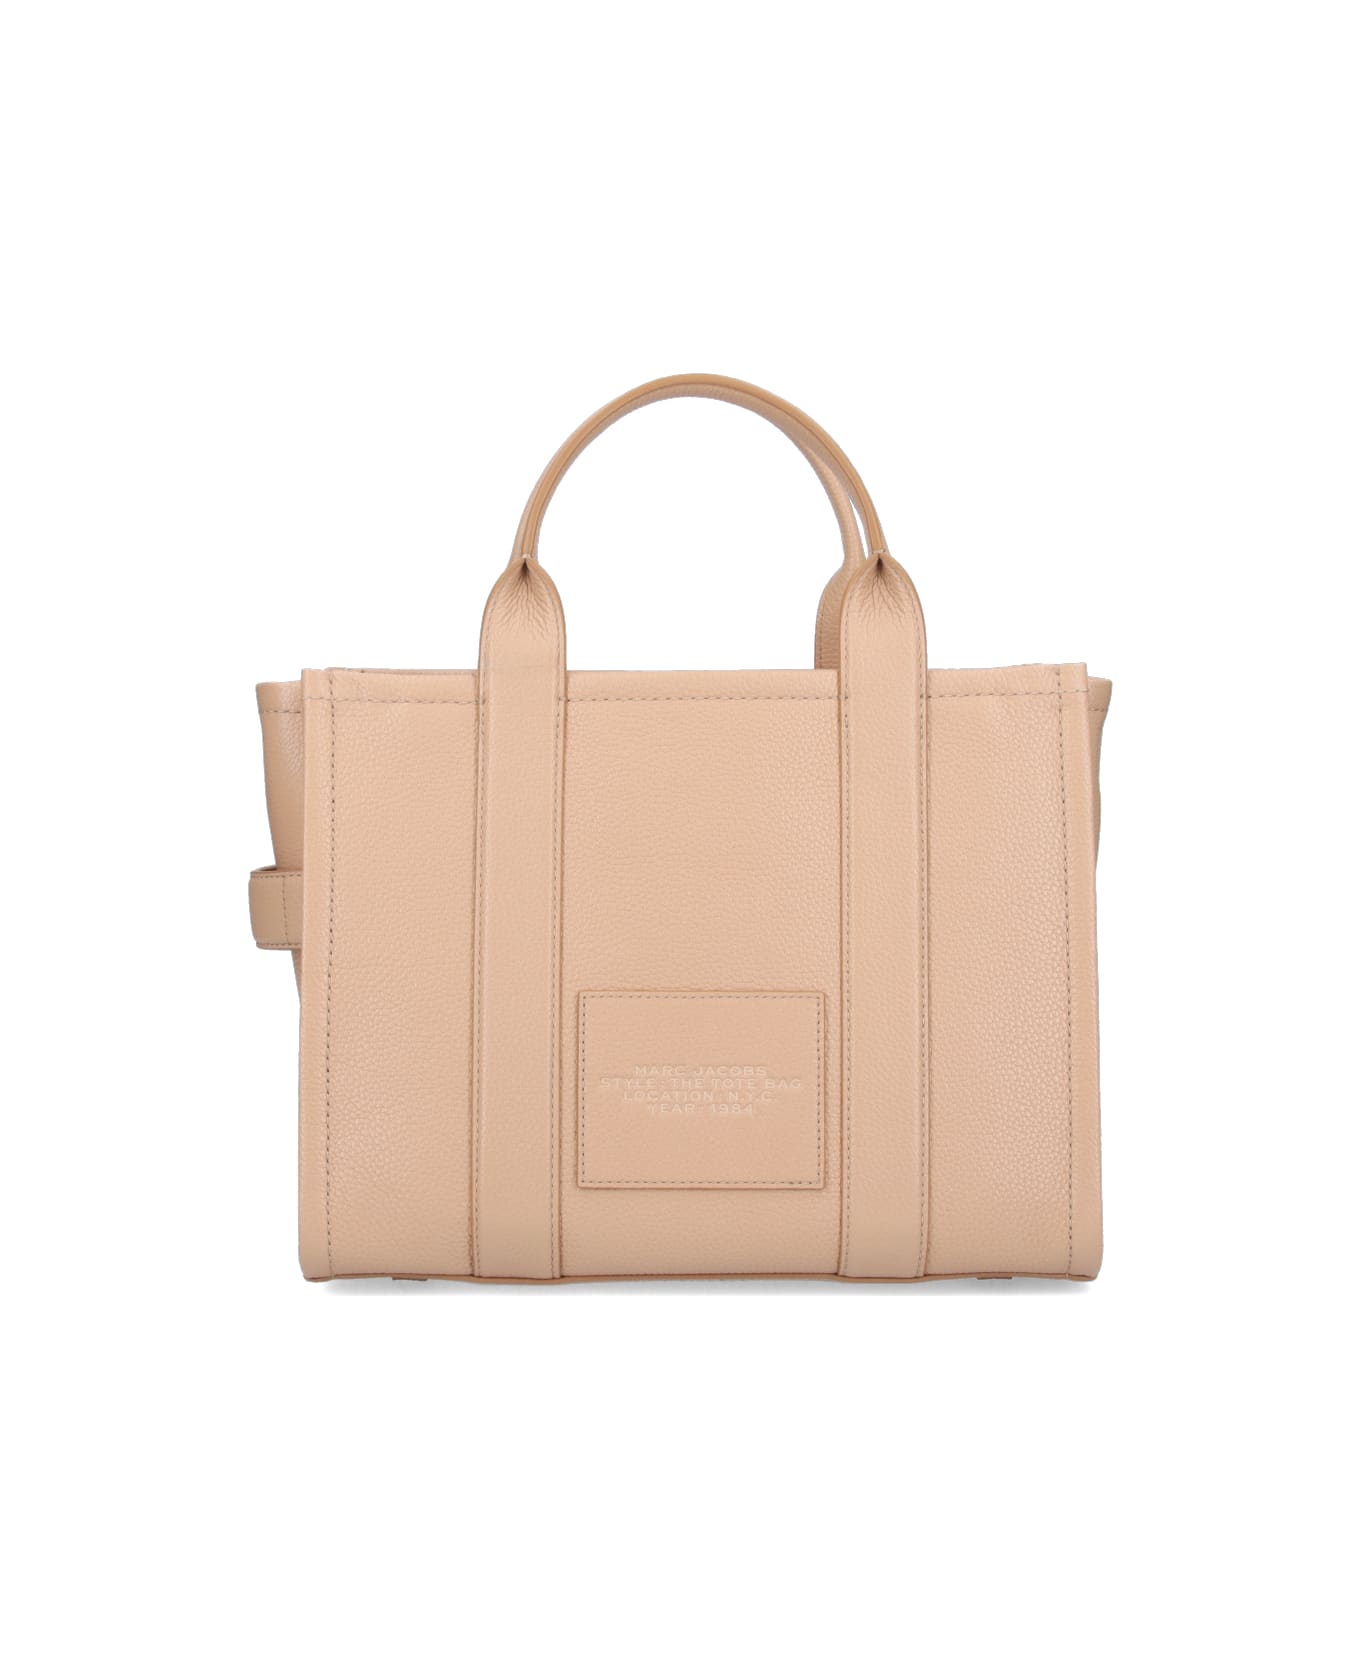 Marc Jacobs The Leather Medium Tote Bag - Camel